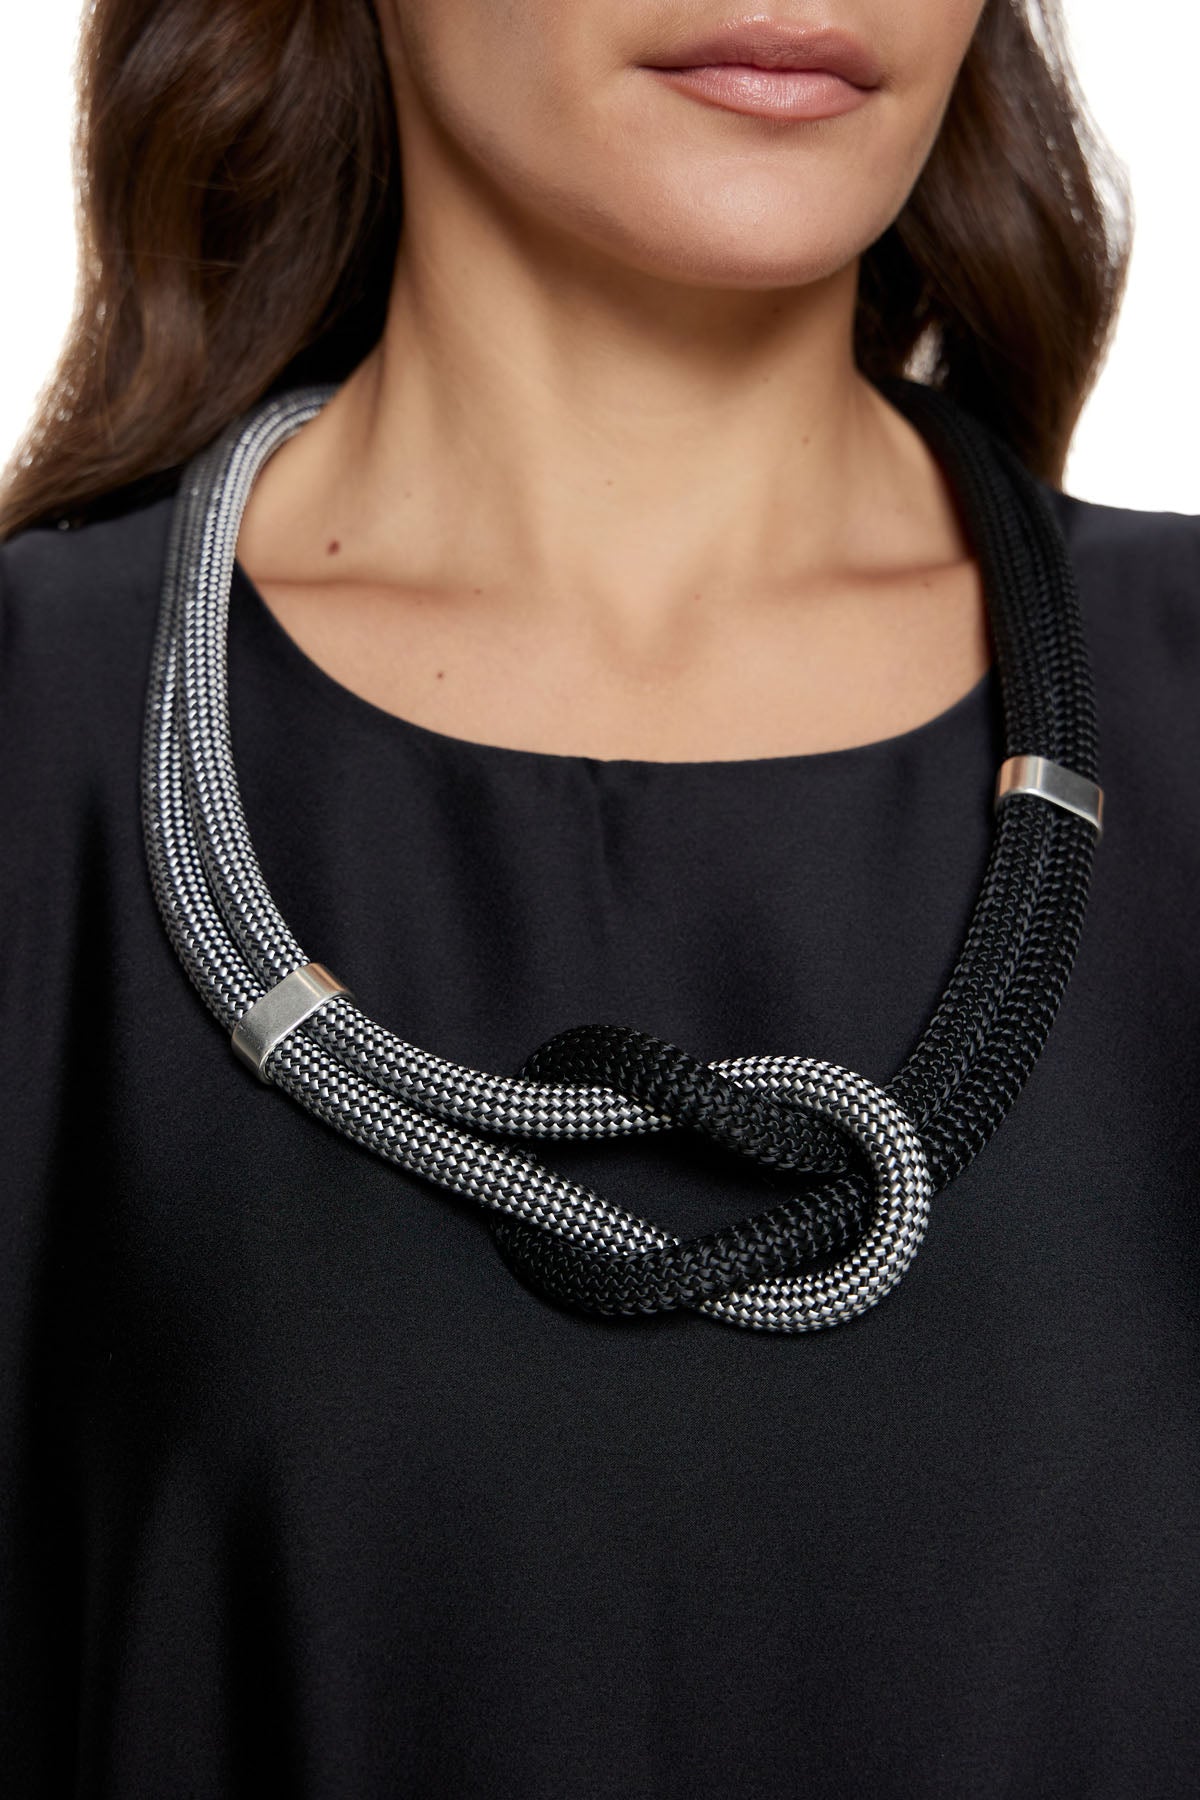 Chic & Simple Tie Reins Necklace - Black and White